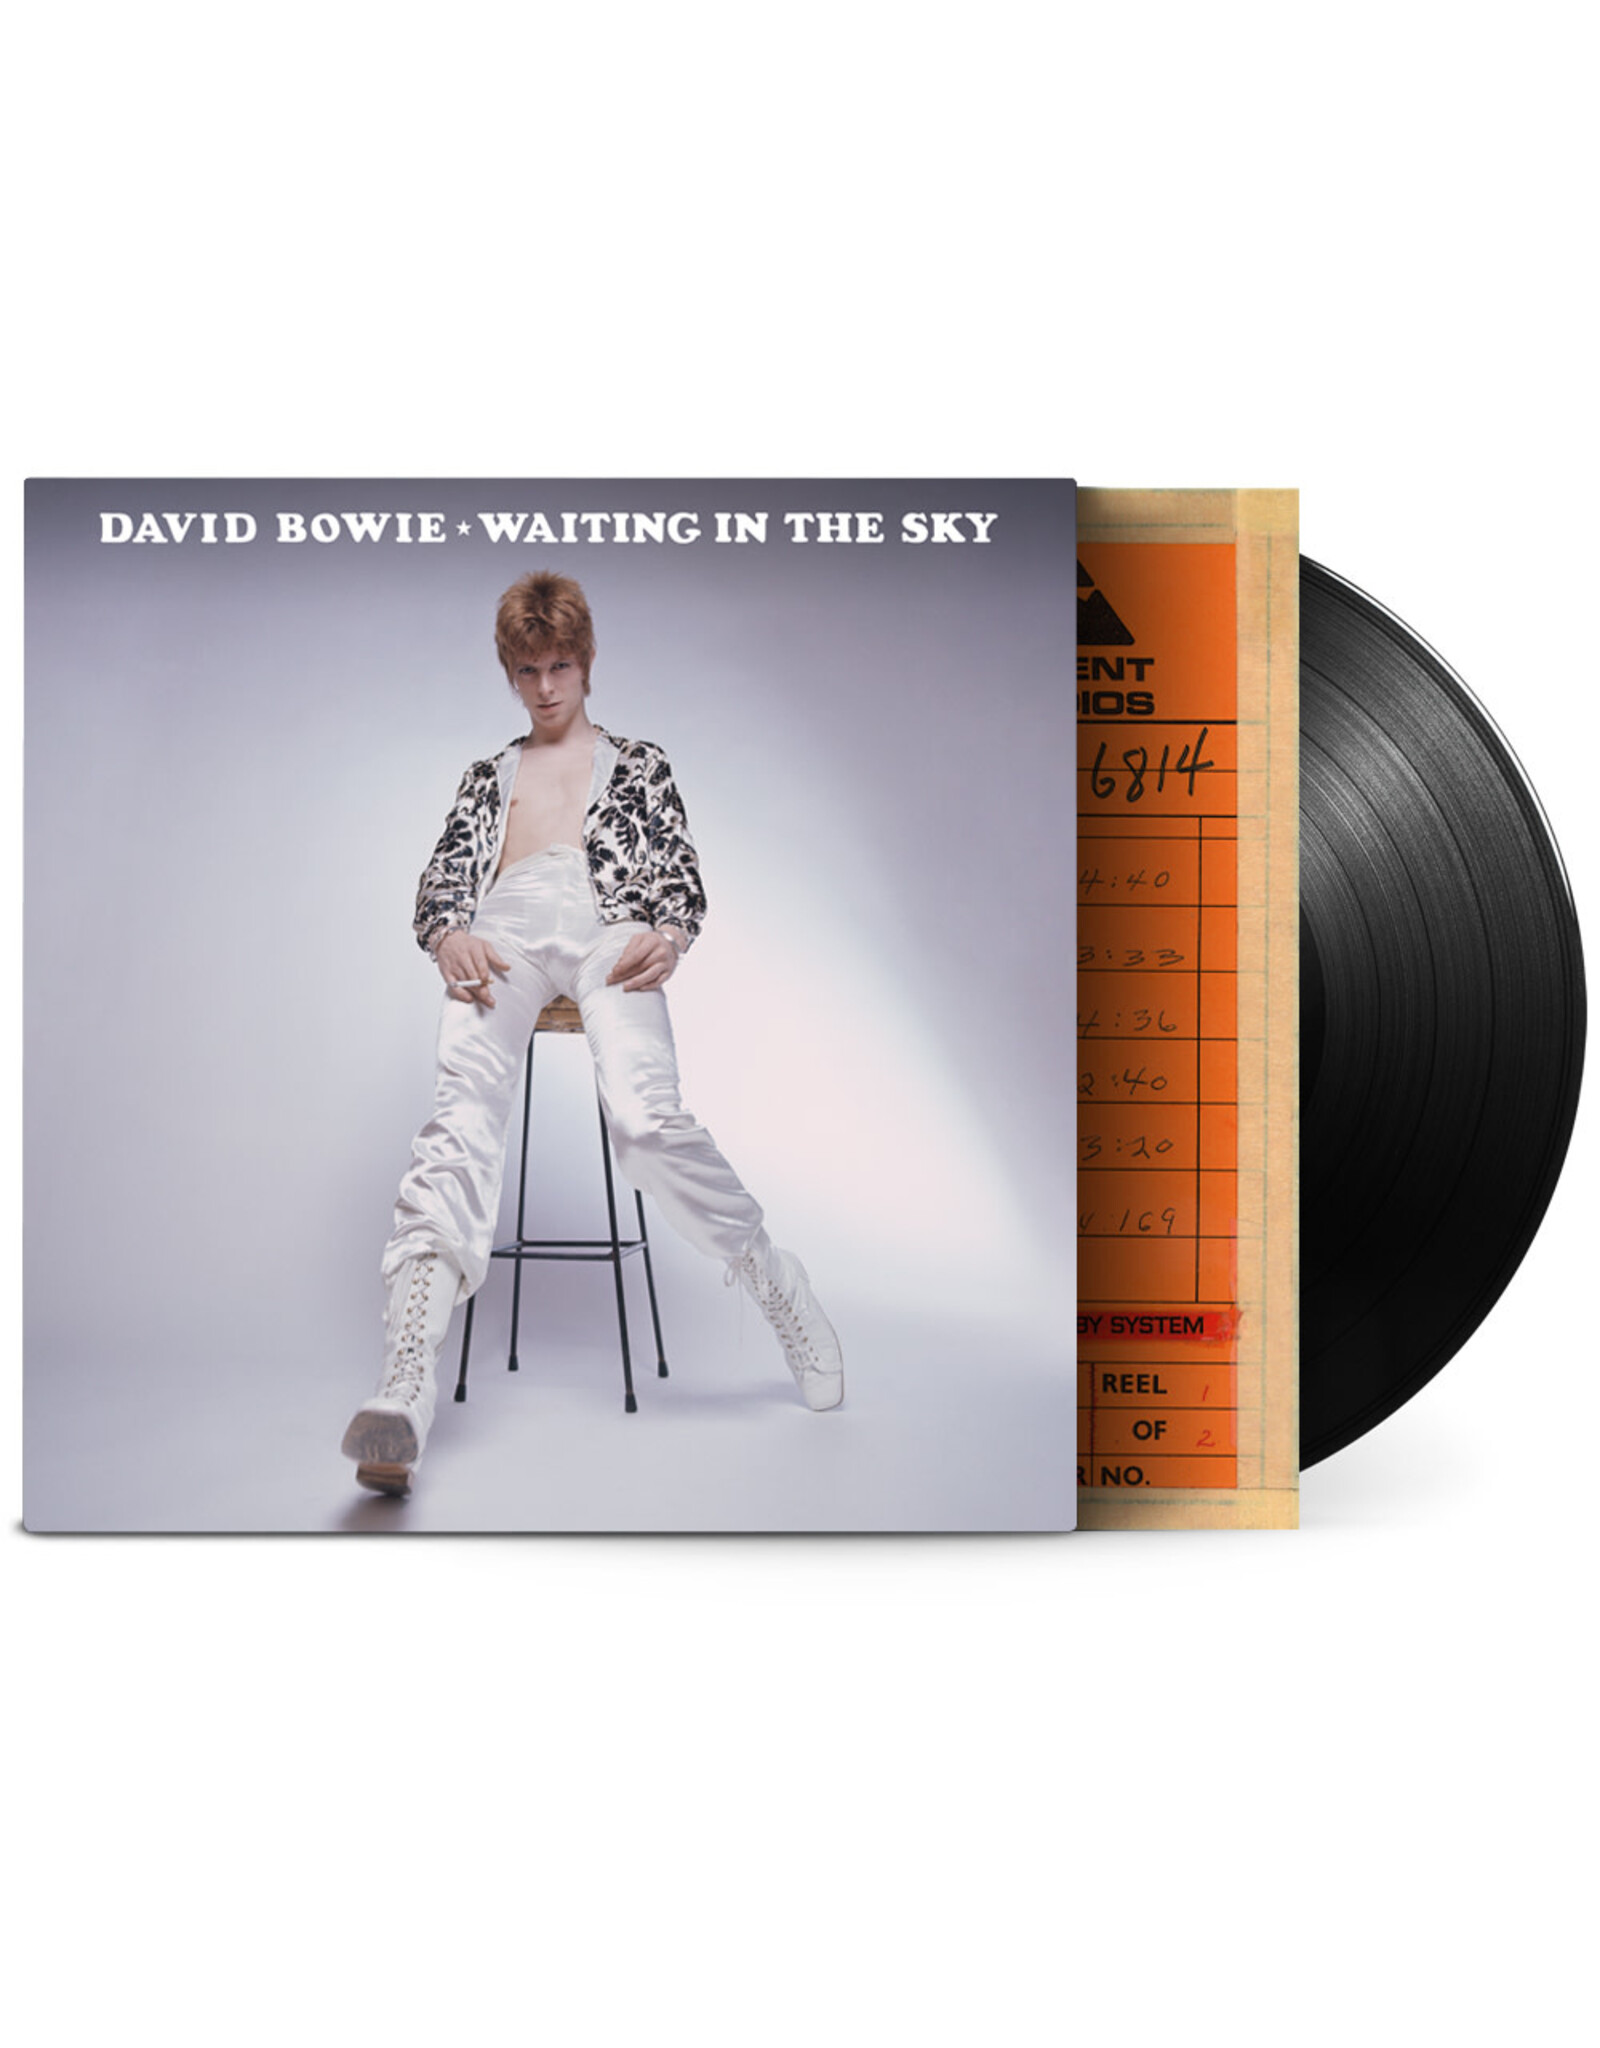 David Bowie - Waiting In The Sky (Record Store Day) [Vinyl] - Pop 